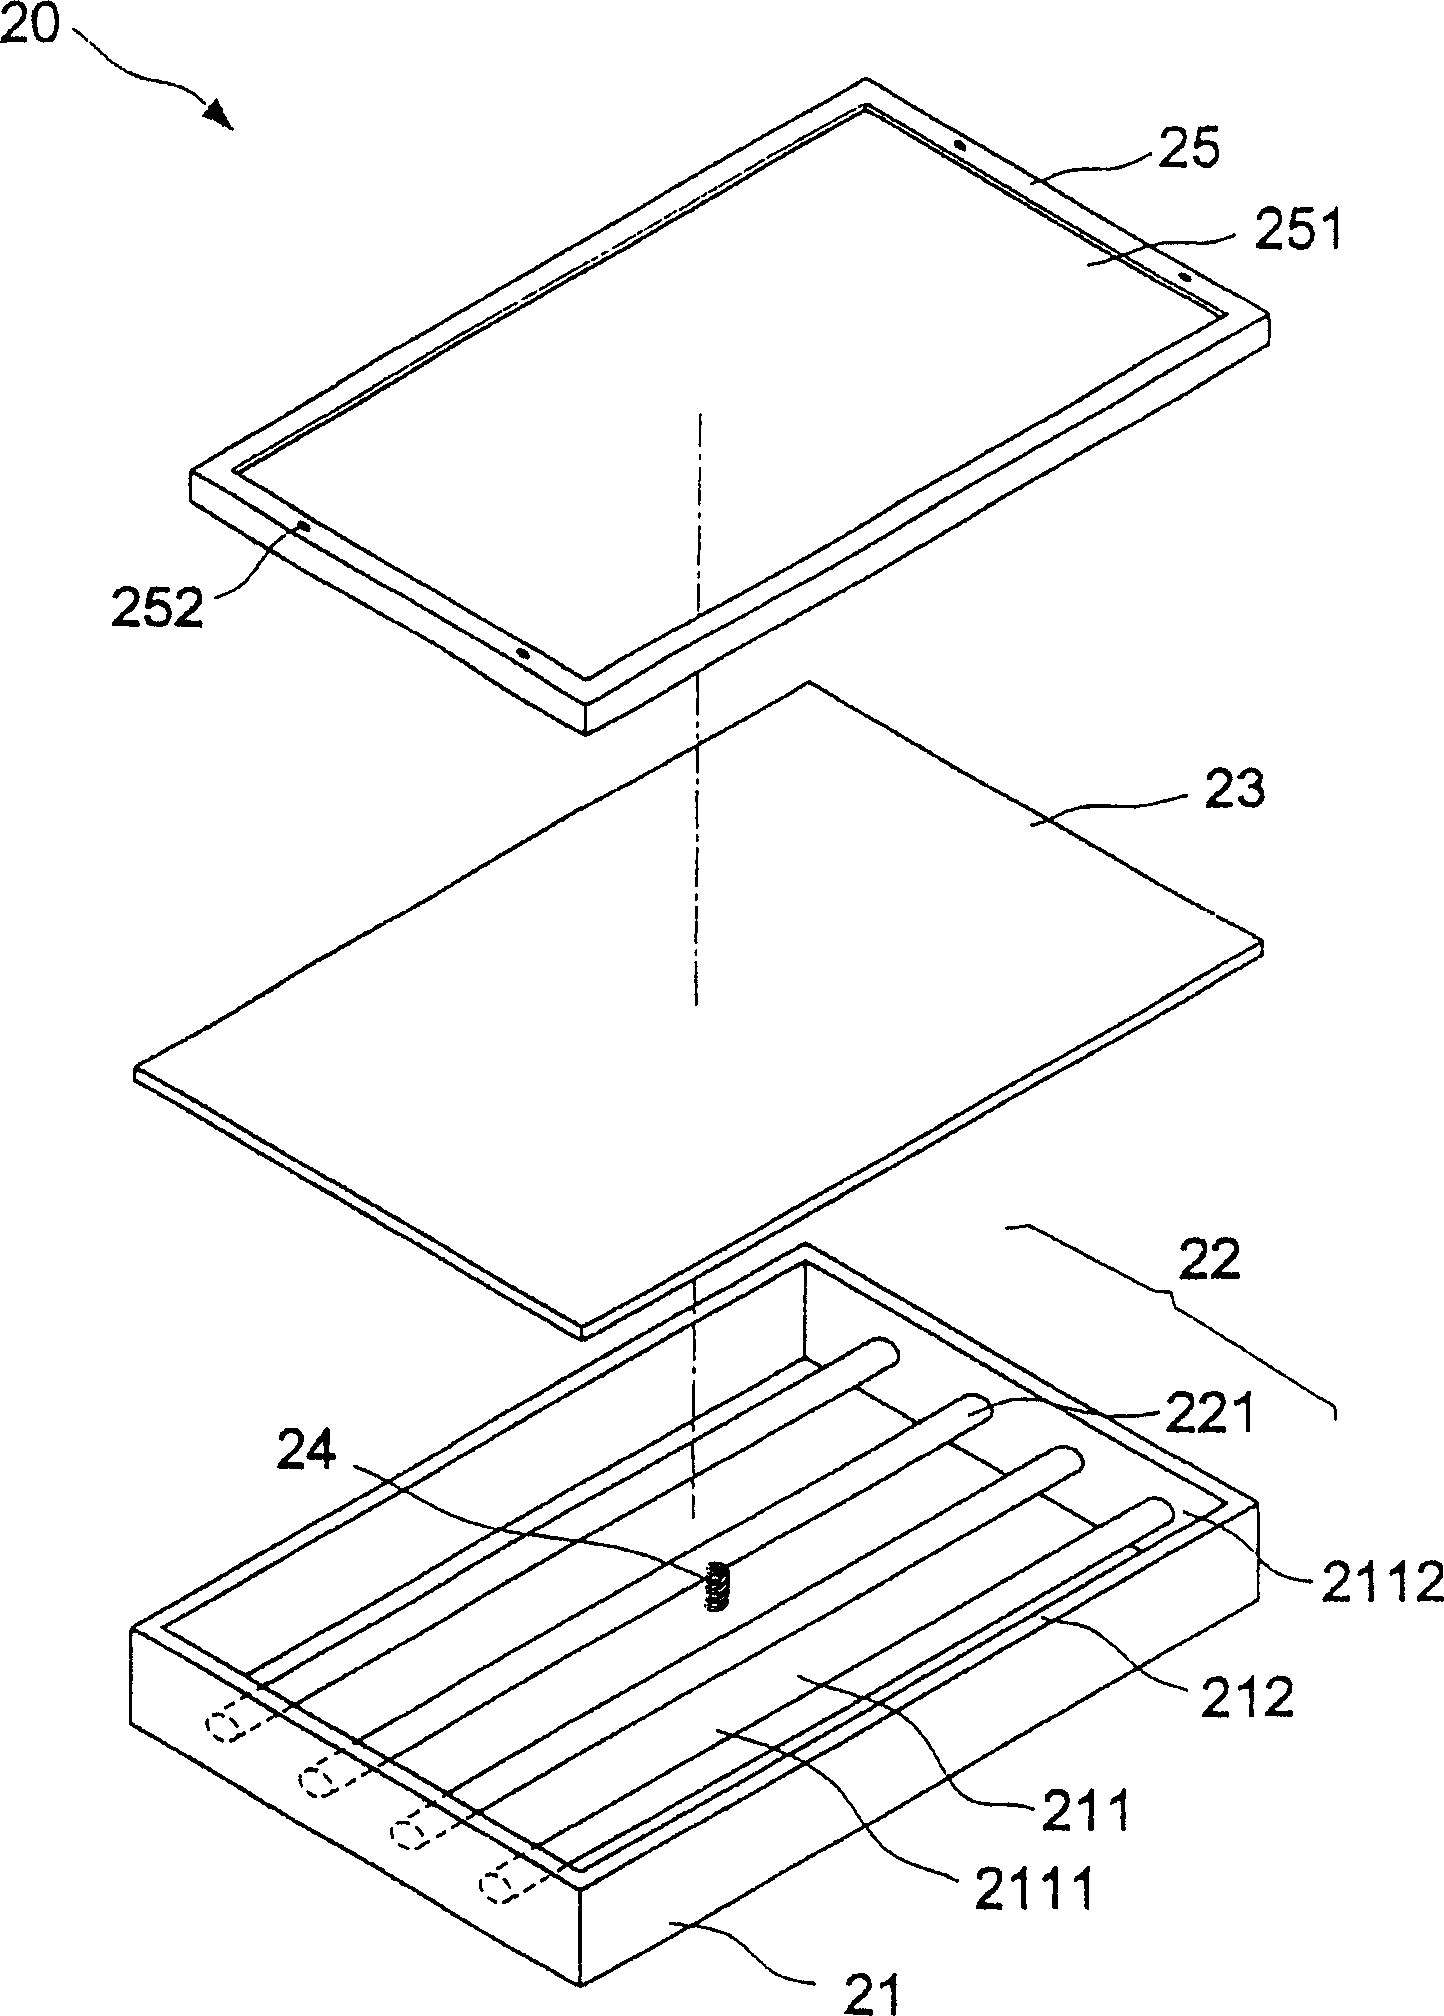 Backlight plate device